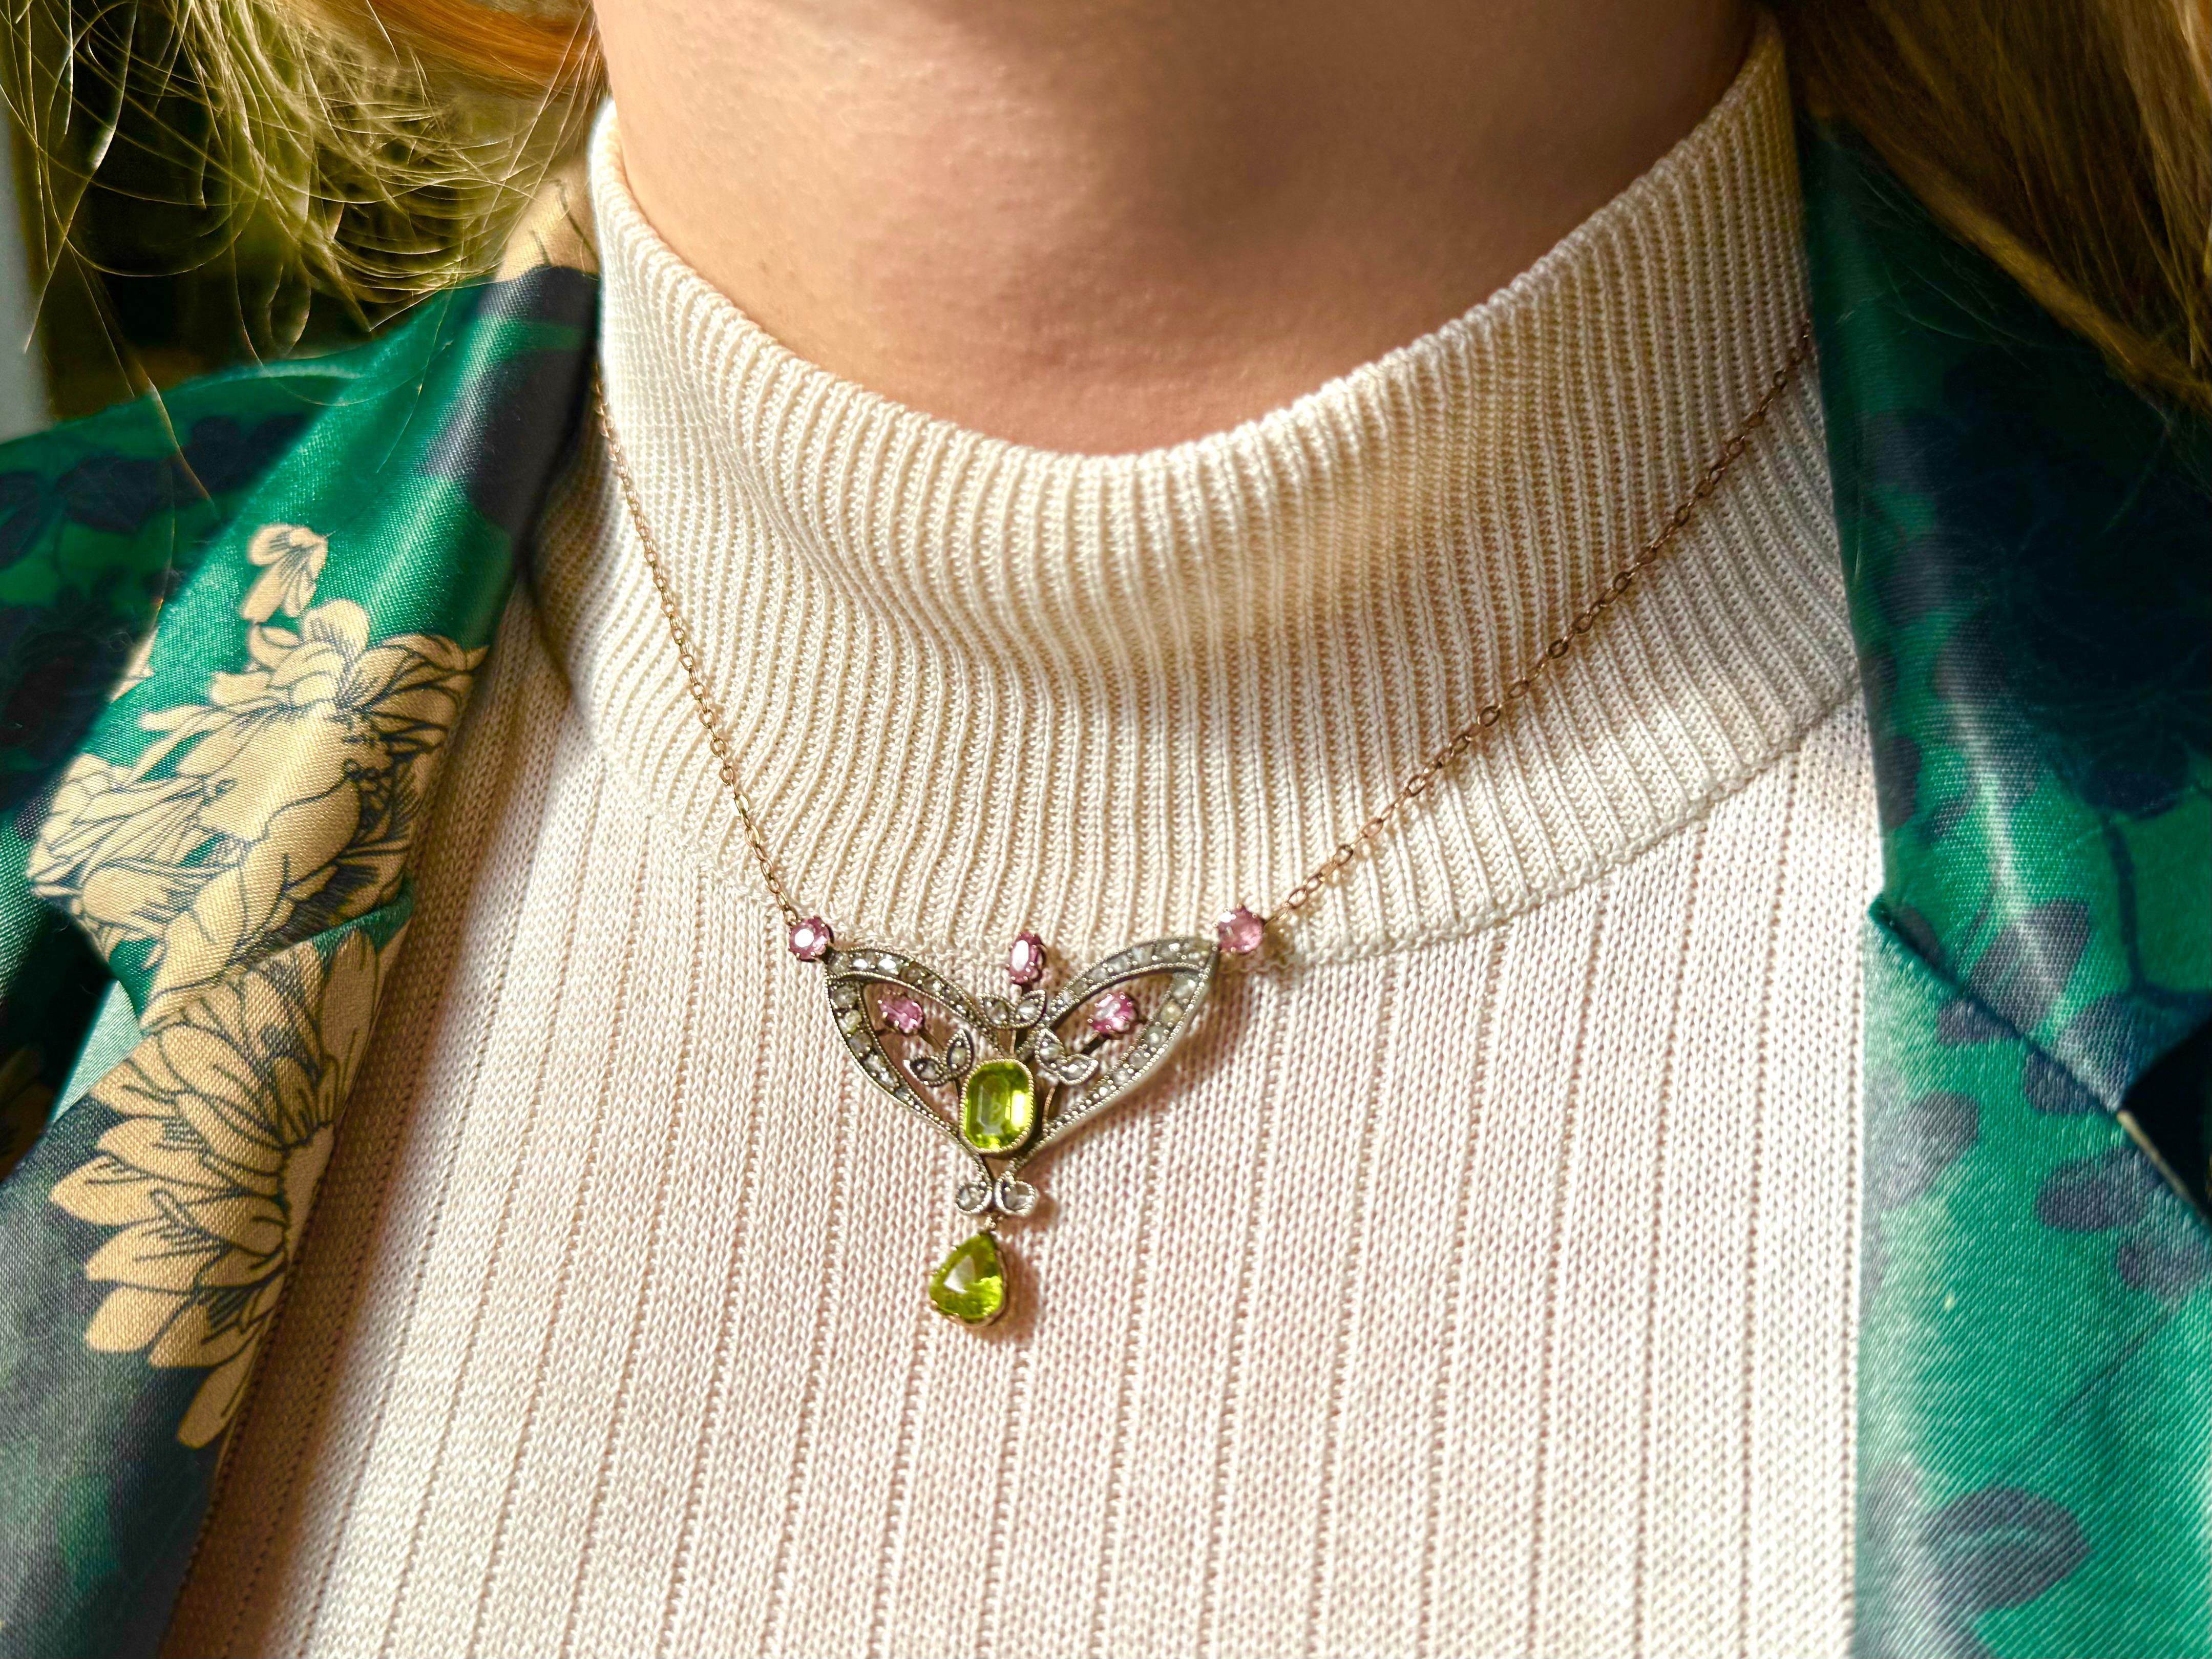 A unique necklace in the Art Nouveau style with a sophisticated form, characteristic of this era. The necklace is set with old-cut diamonds, 5 pink tourmalines and two beautiful green peridots. The choice of stone colors is not accidental here and